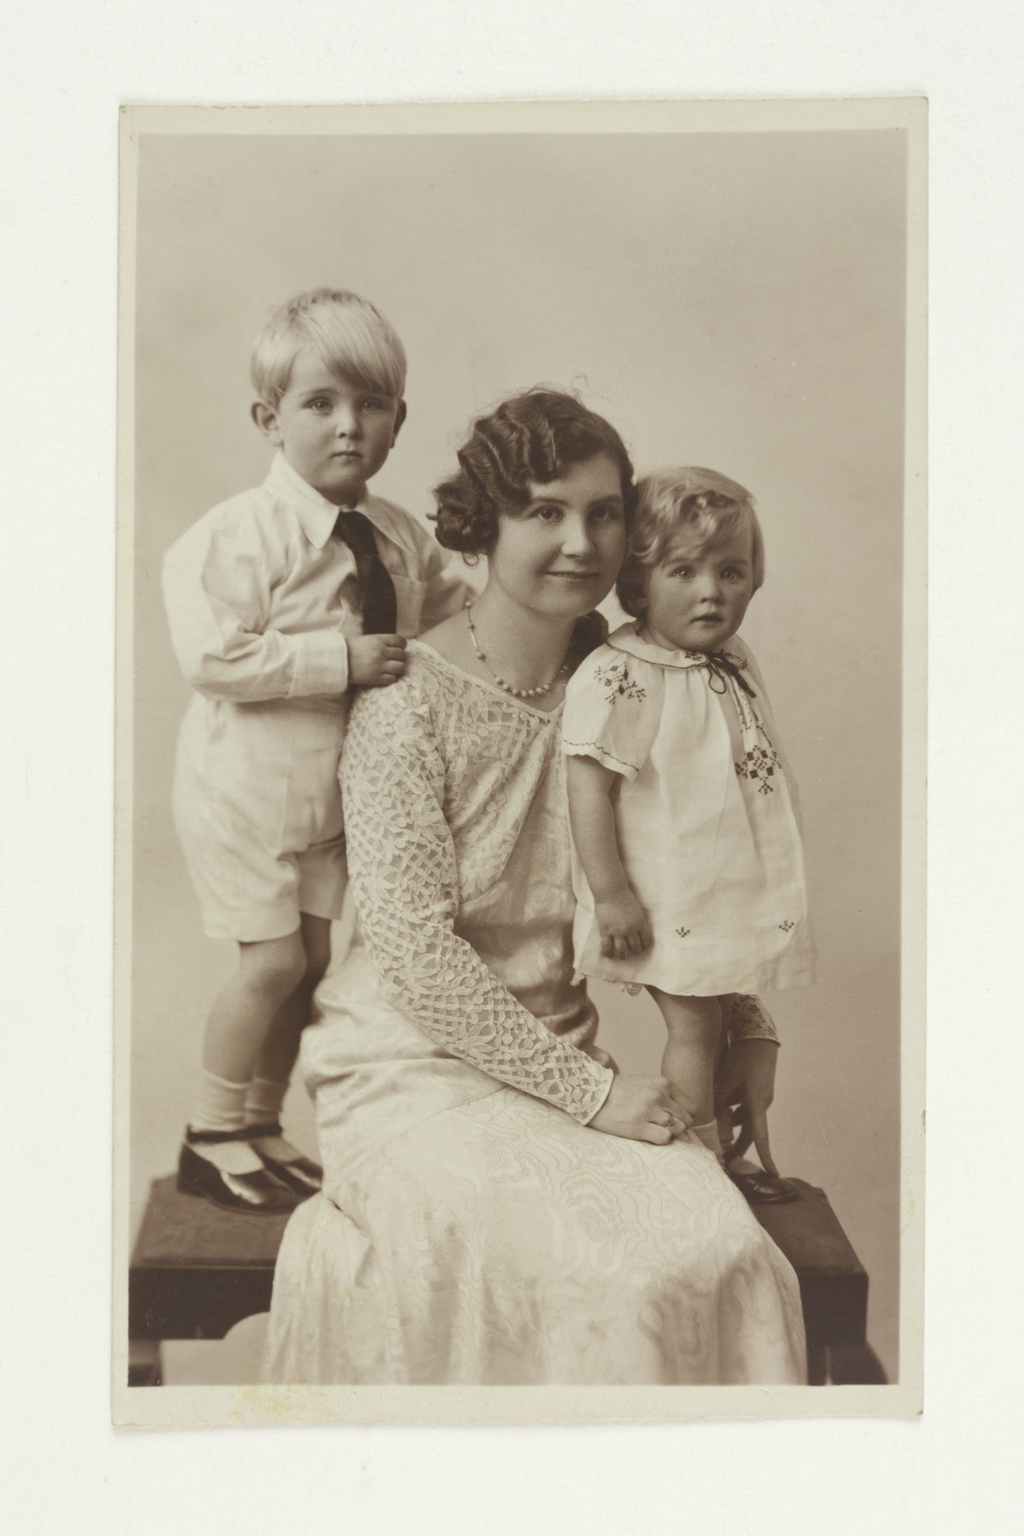 Postcard featuring portrait of Frances Way (formerly Frances Griffiths), seated with children David and Christine